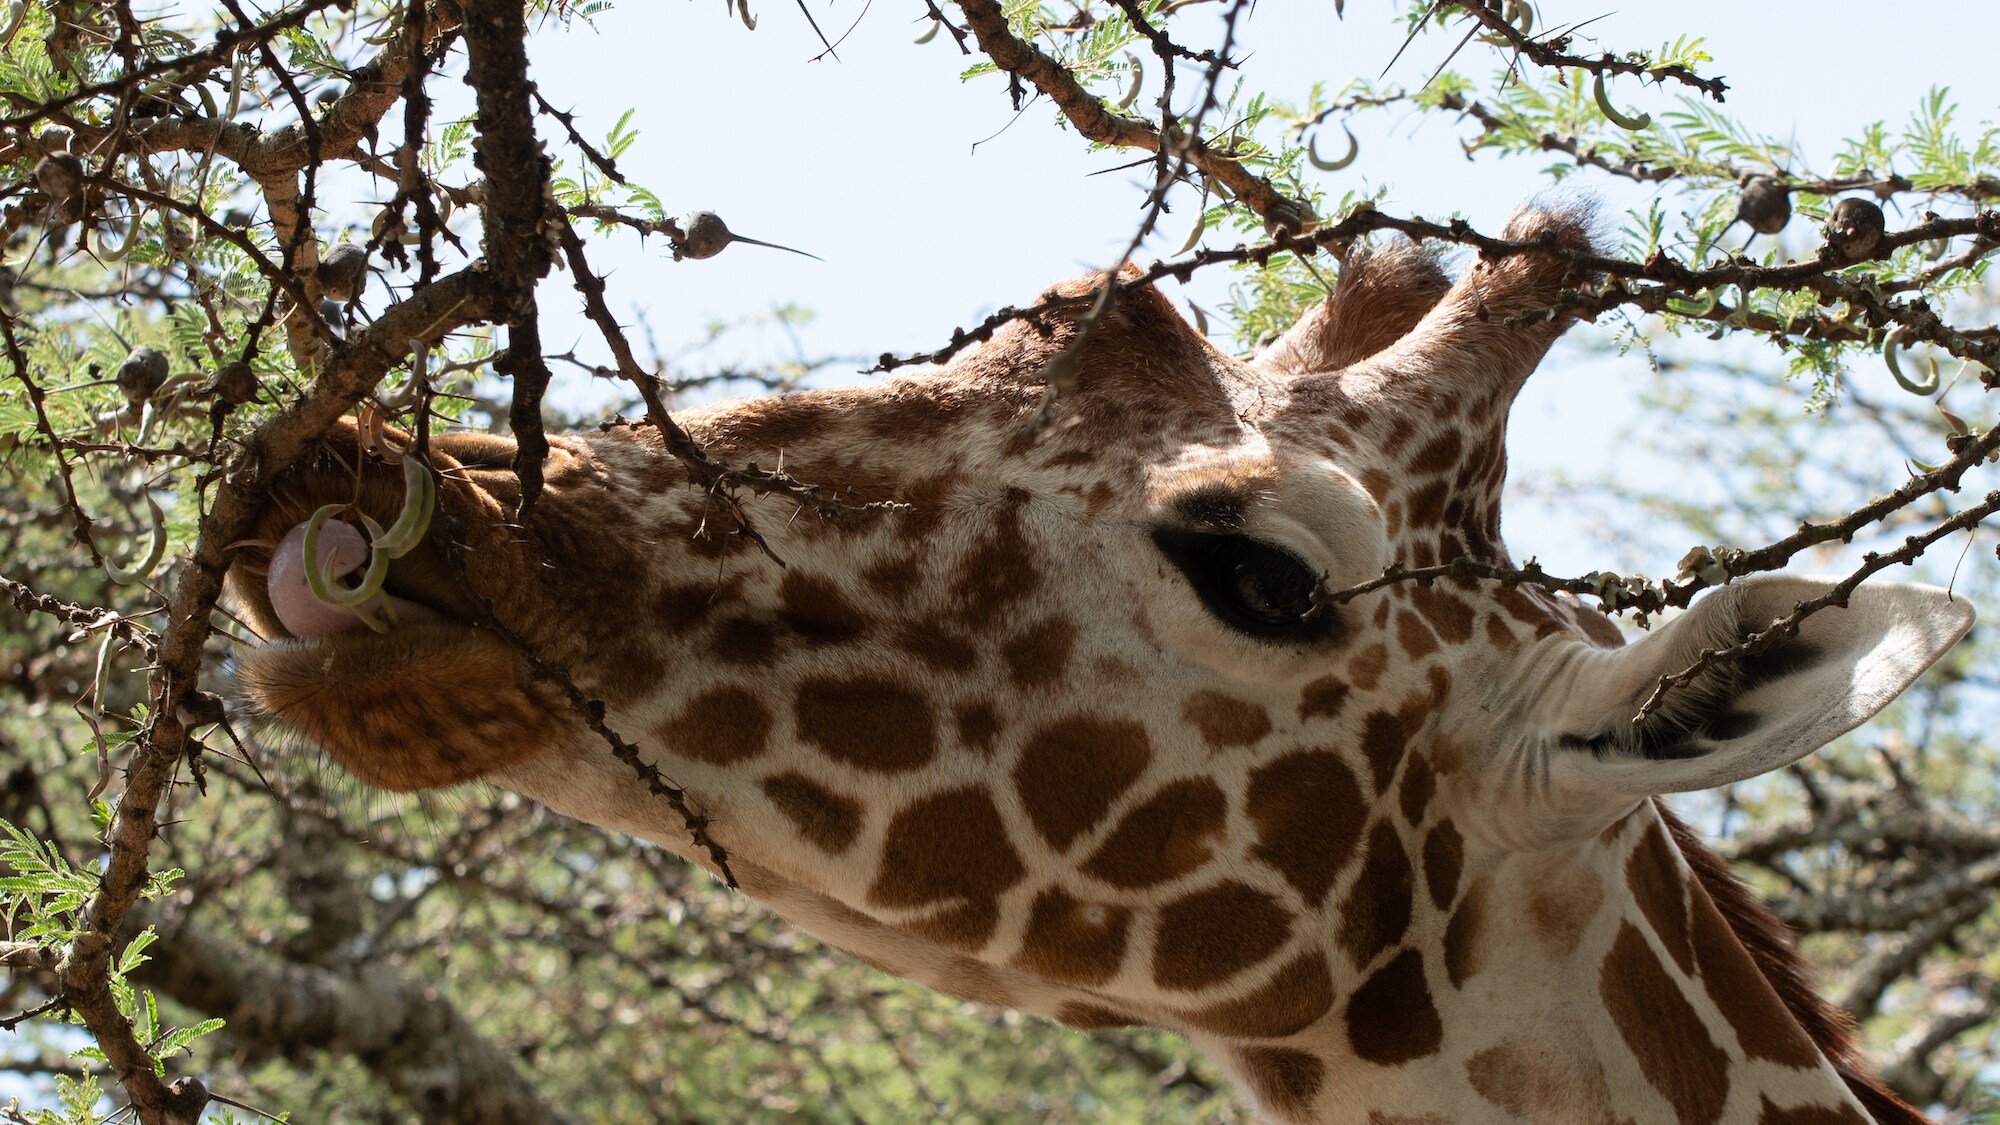 A Giraffe eating from the Acacia Tree in Ol Pejeta National Park.  (National Geographic for Disney+/Maurice Oniang’o)